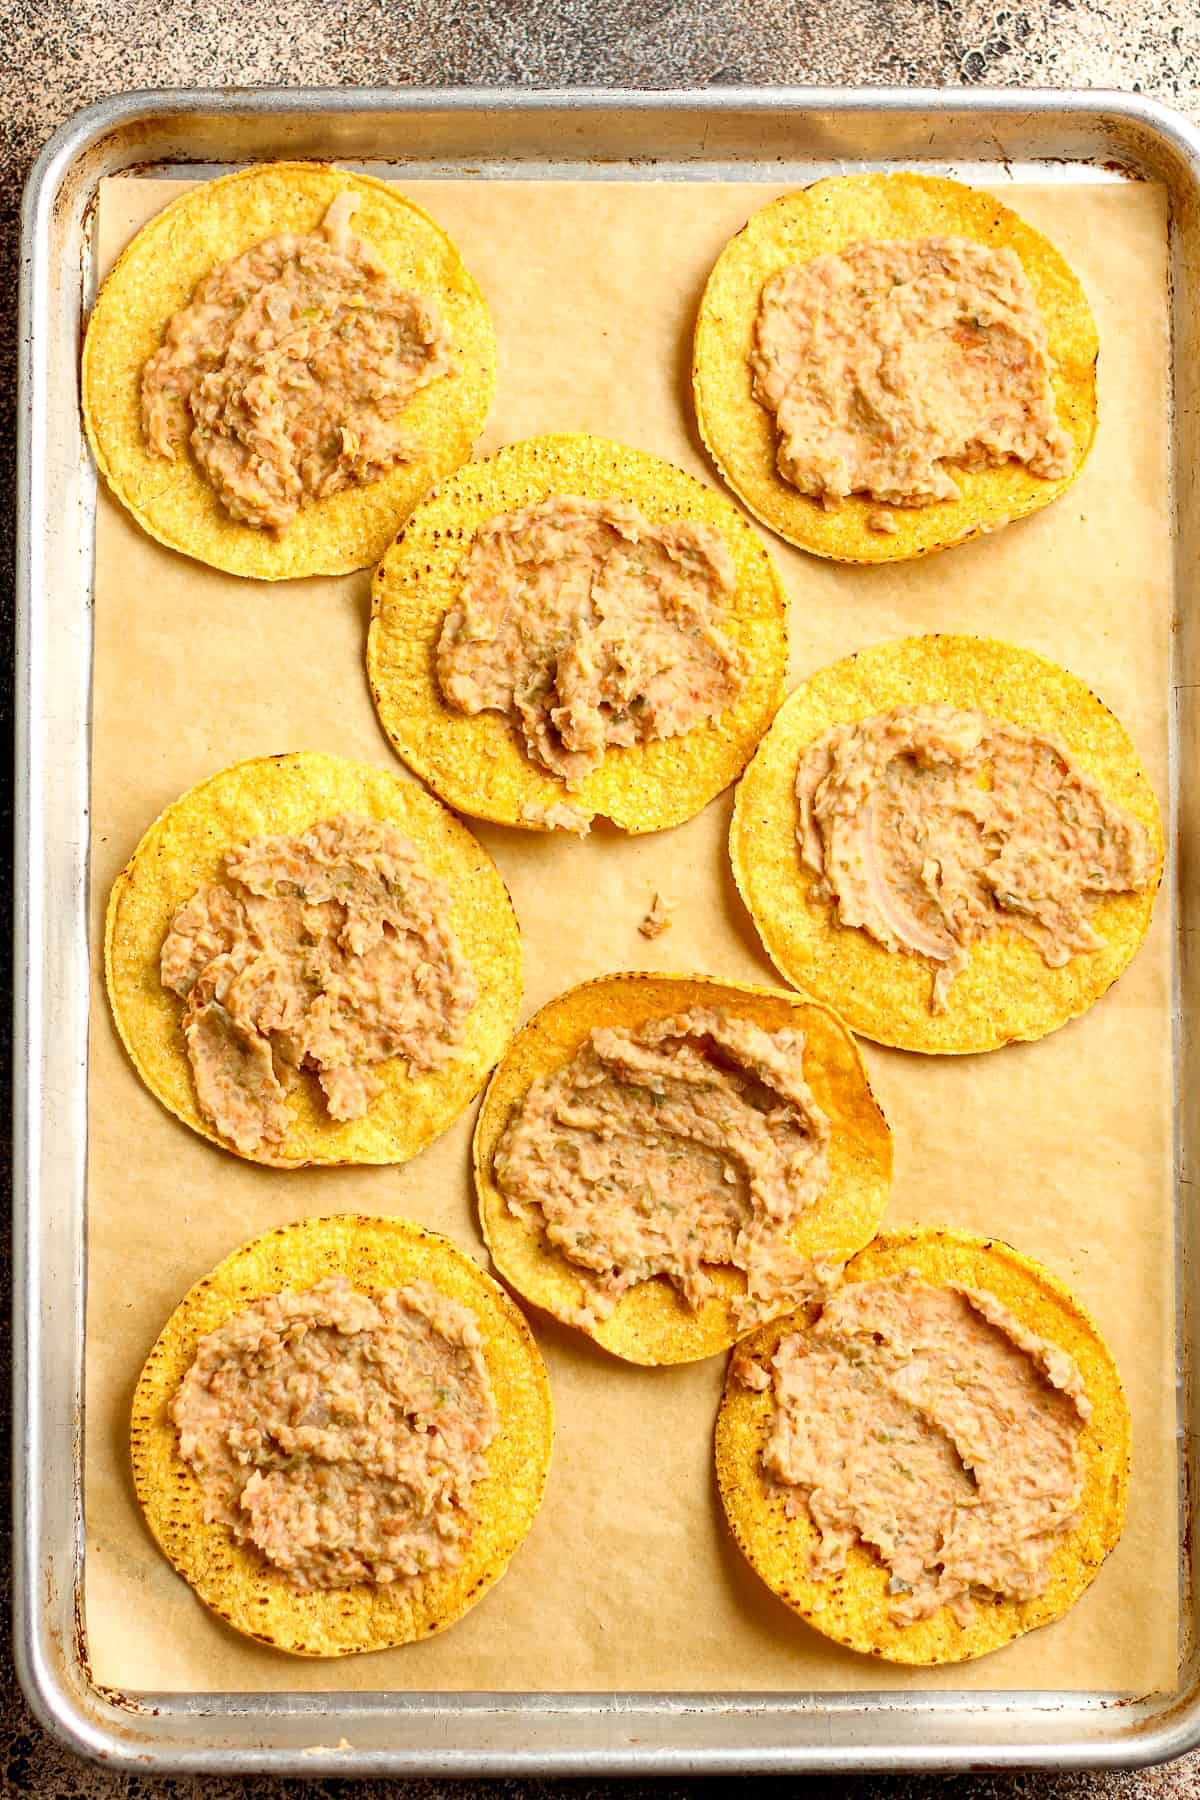 A pan of the tostadas with refried beans on top.